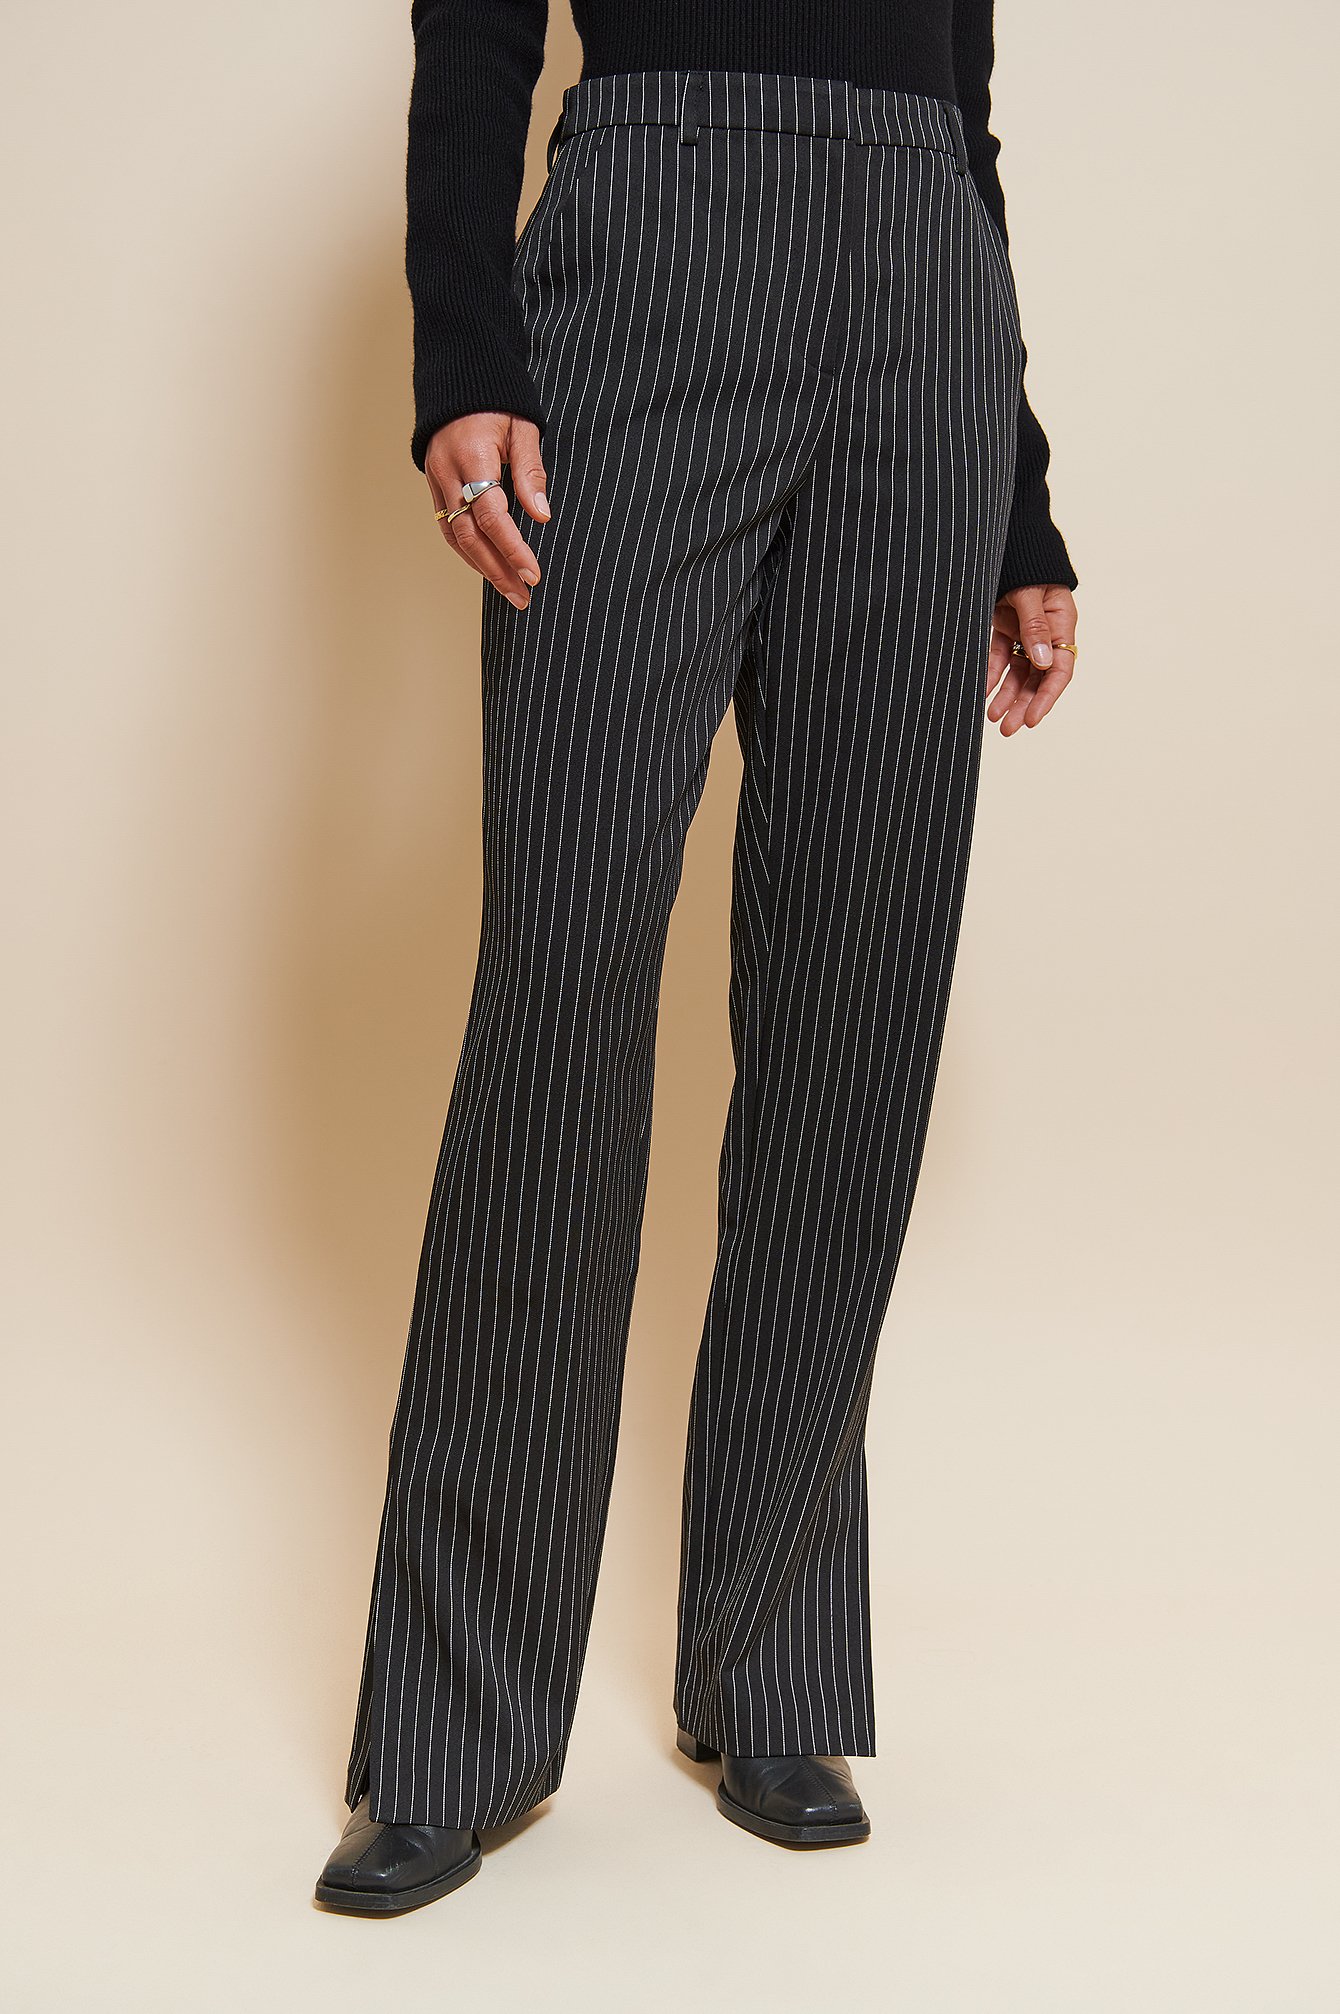 Fashion Trousers Drainpipe Trousers Denny Rose Drainpipe Trousers blue striped pattern casual look 